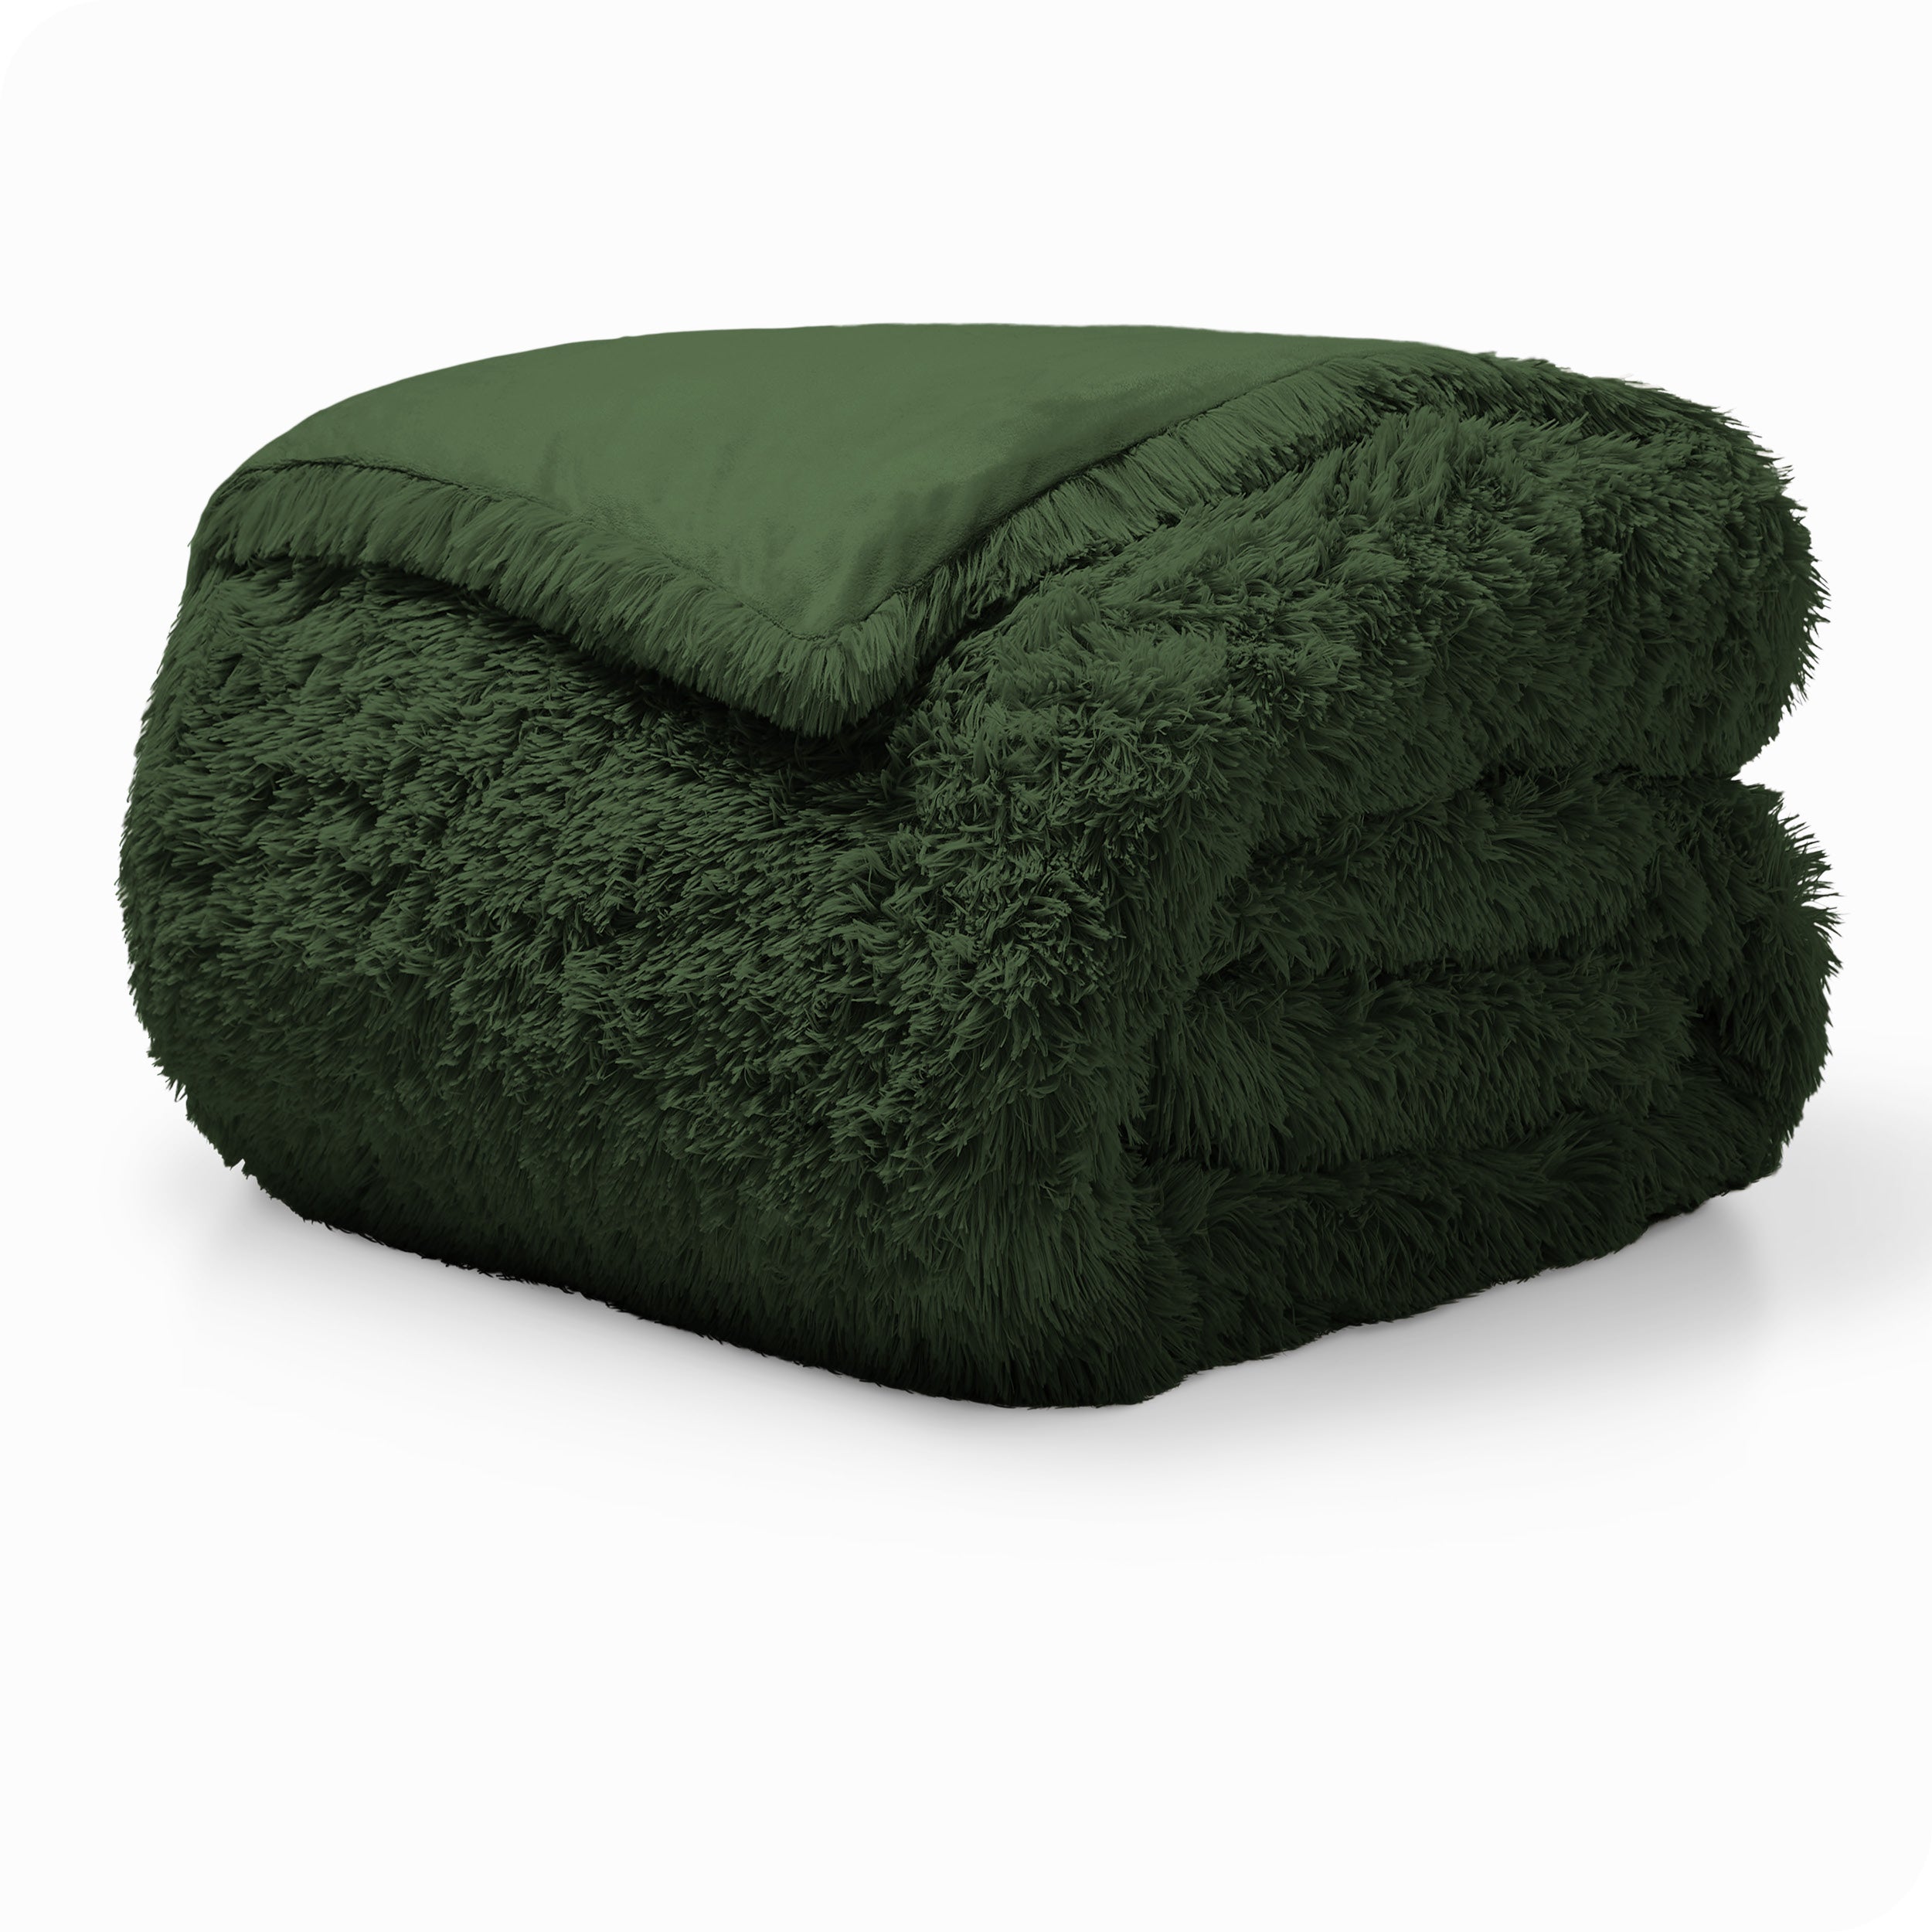 A forest green shaggy duvet cover folded neatly